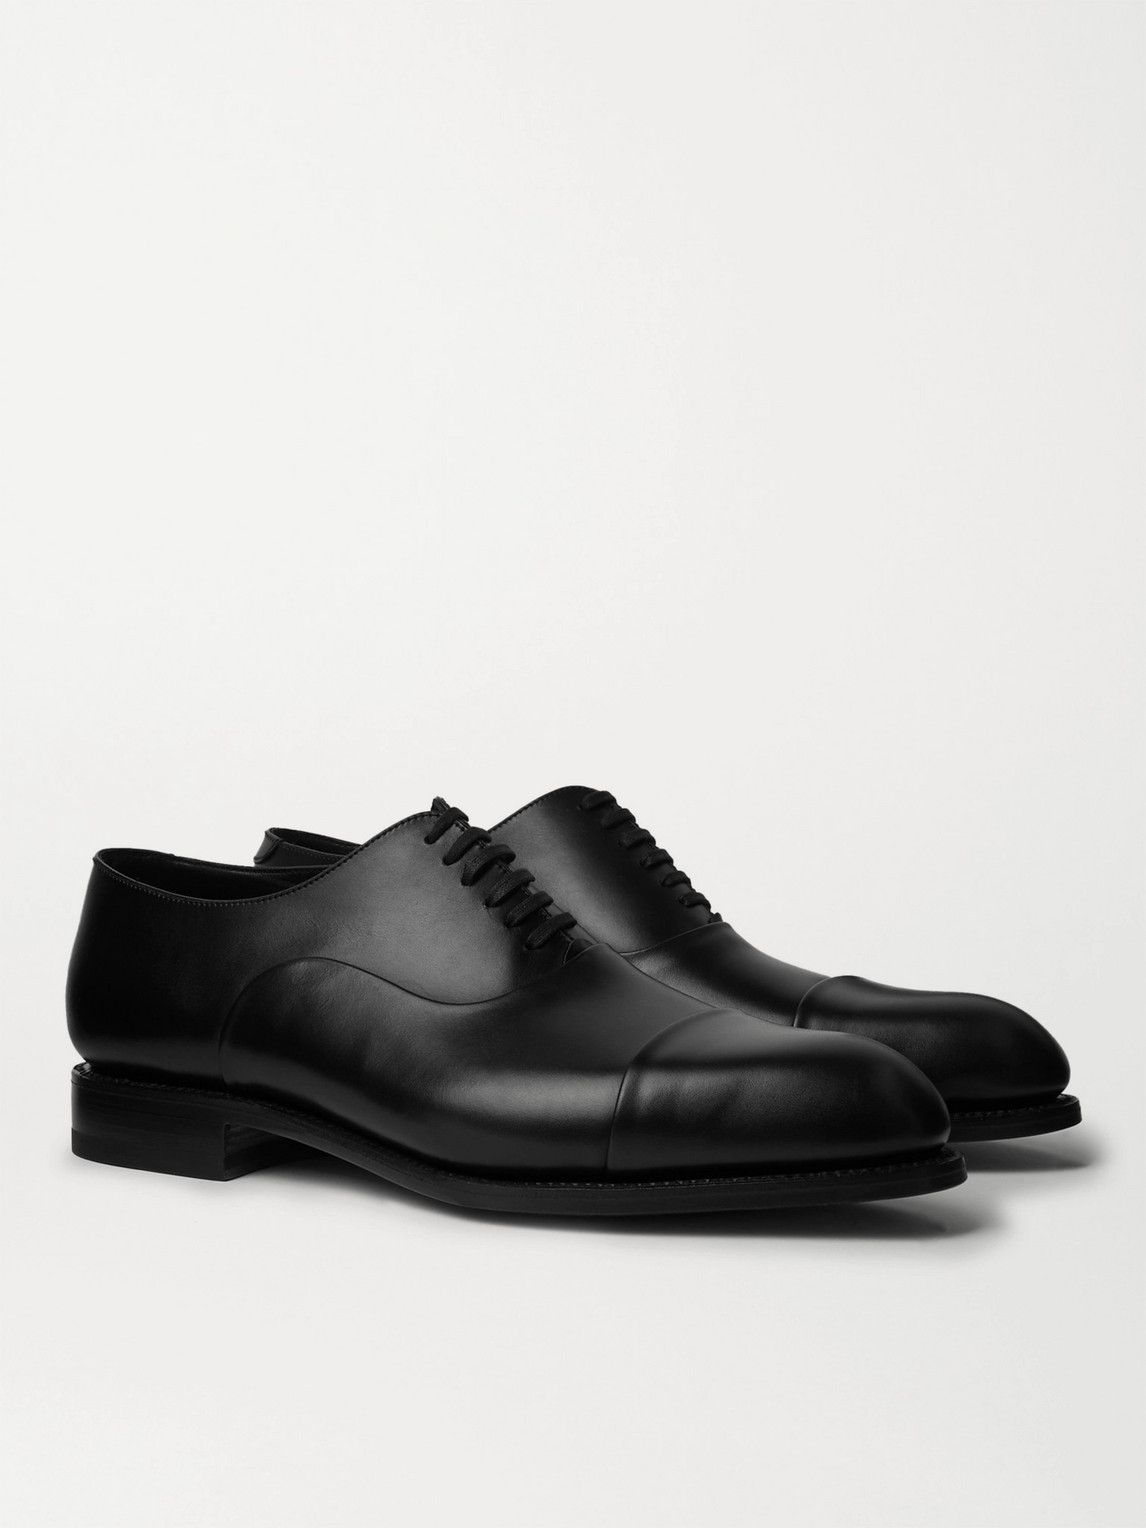 Jm Weston Leather Oxford Shoes In Black